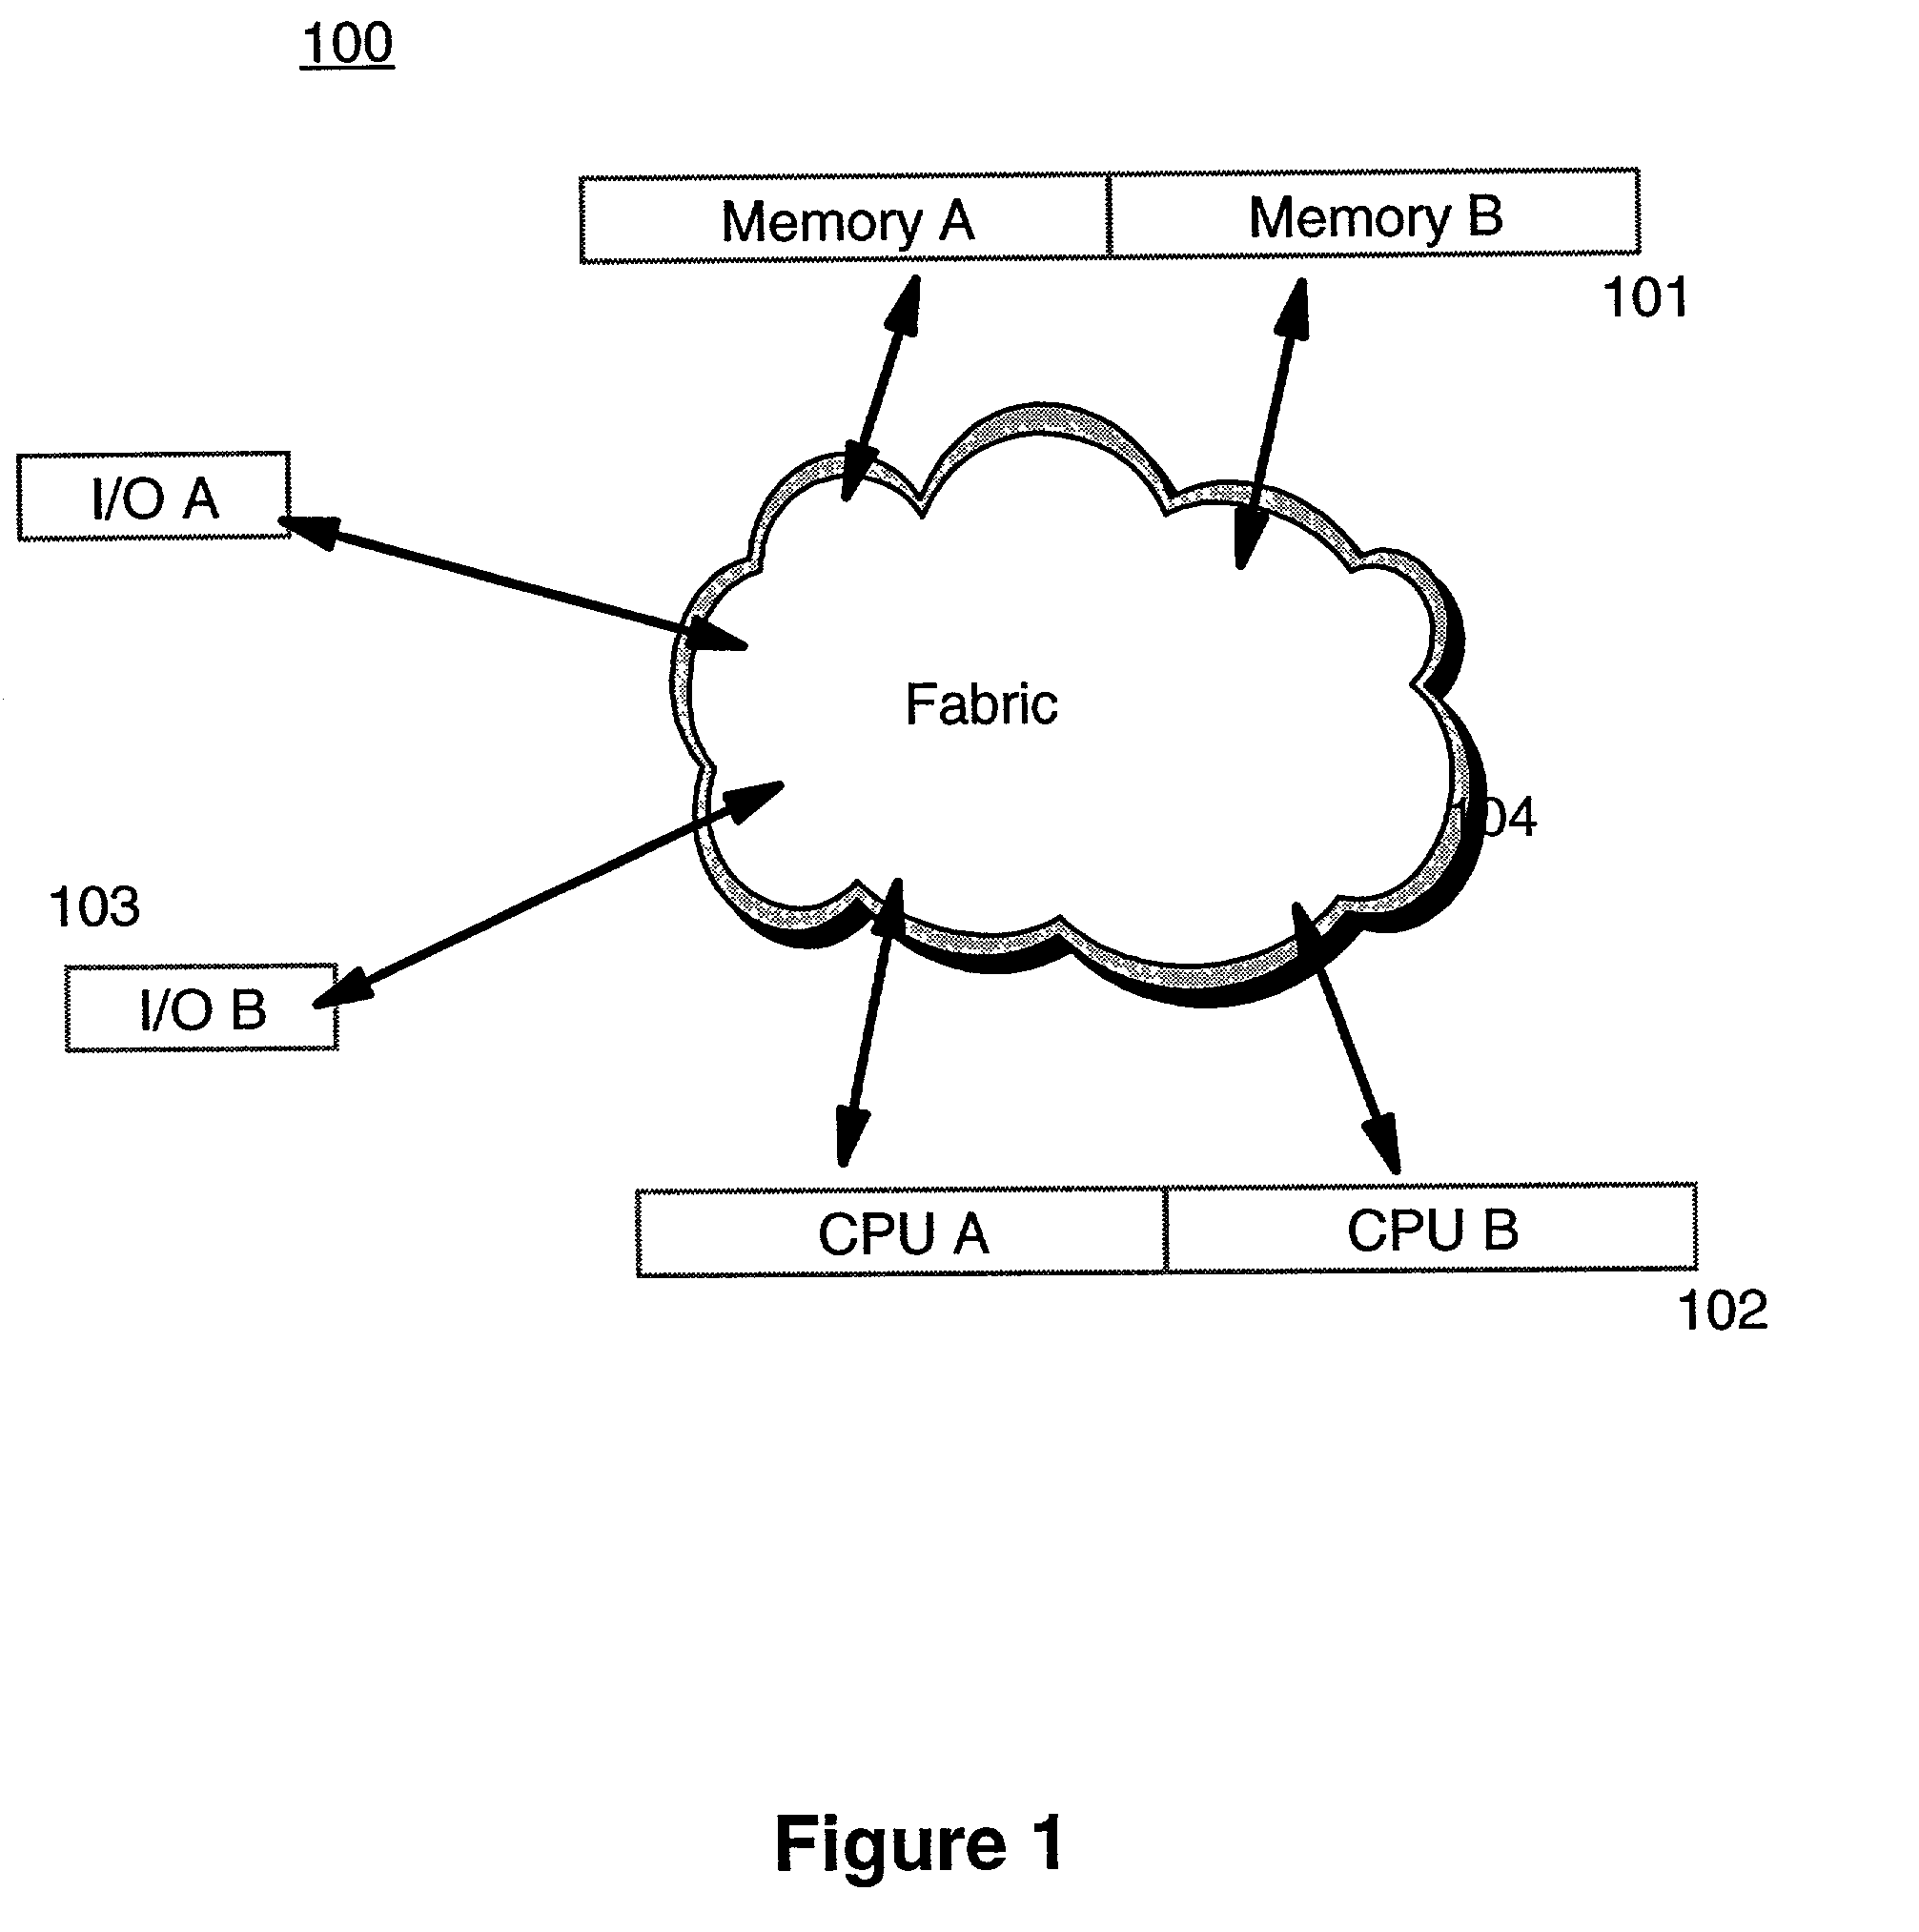 Inter-partition message passing method, system and program product for a shared I/O driver